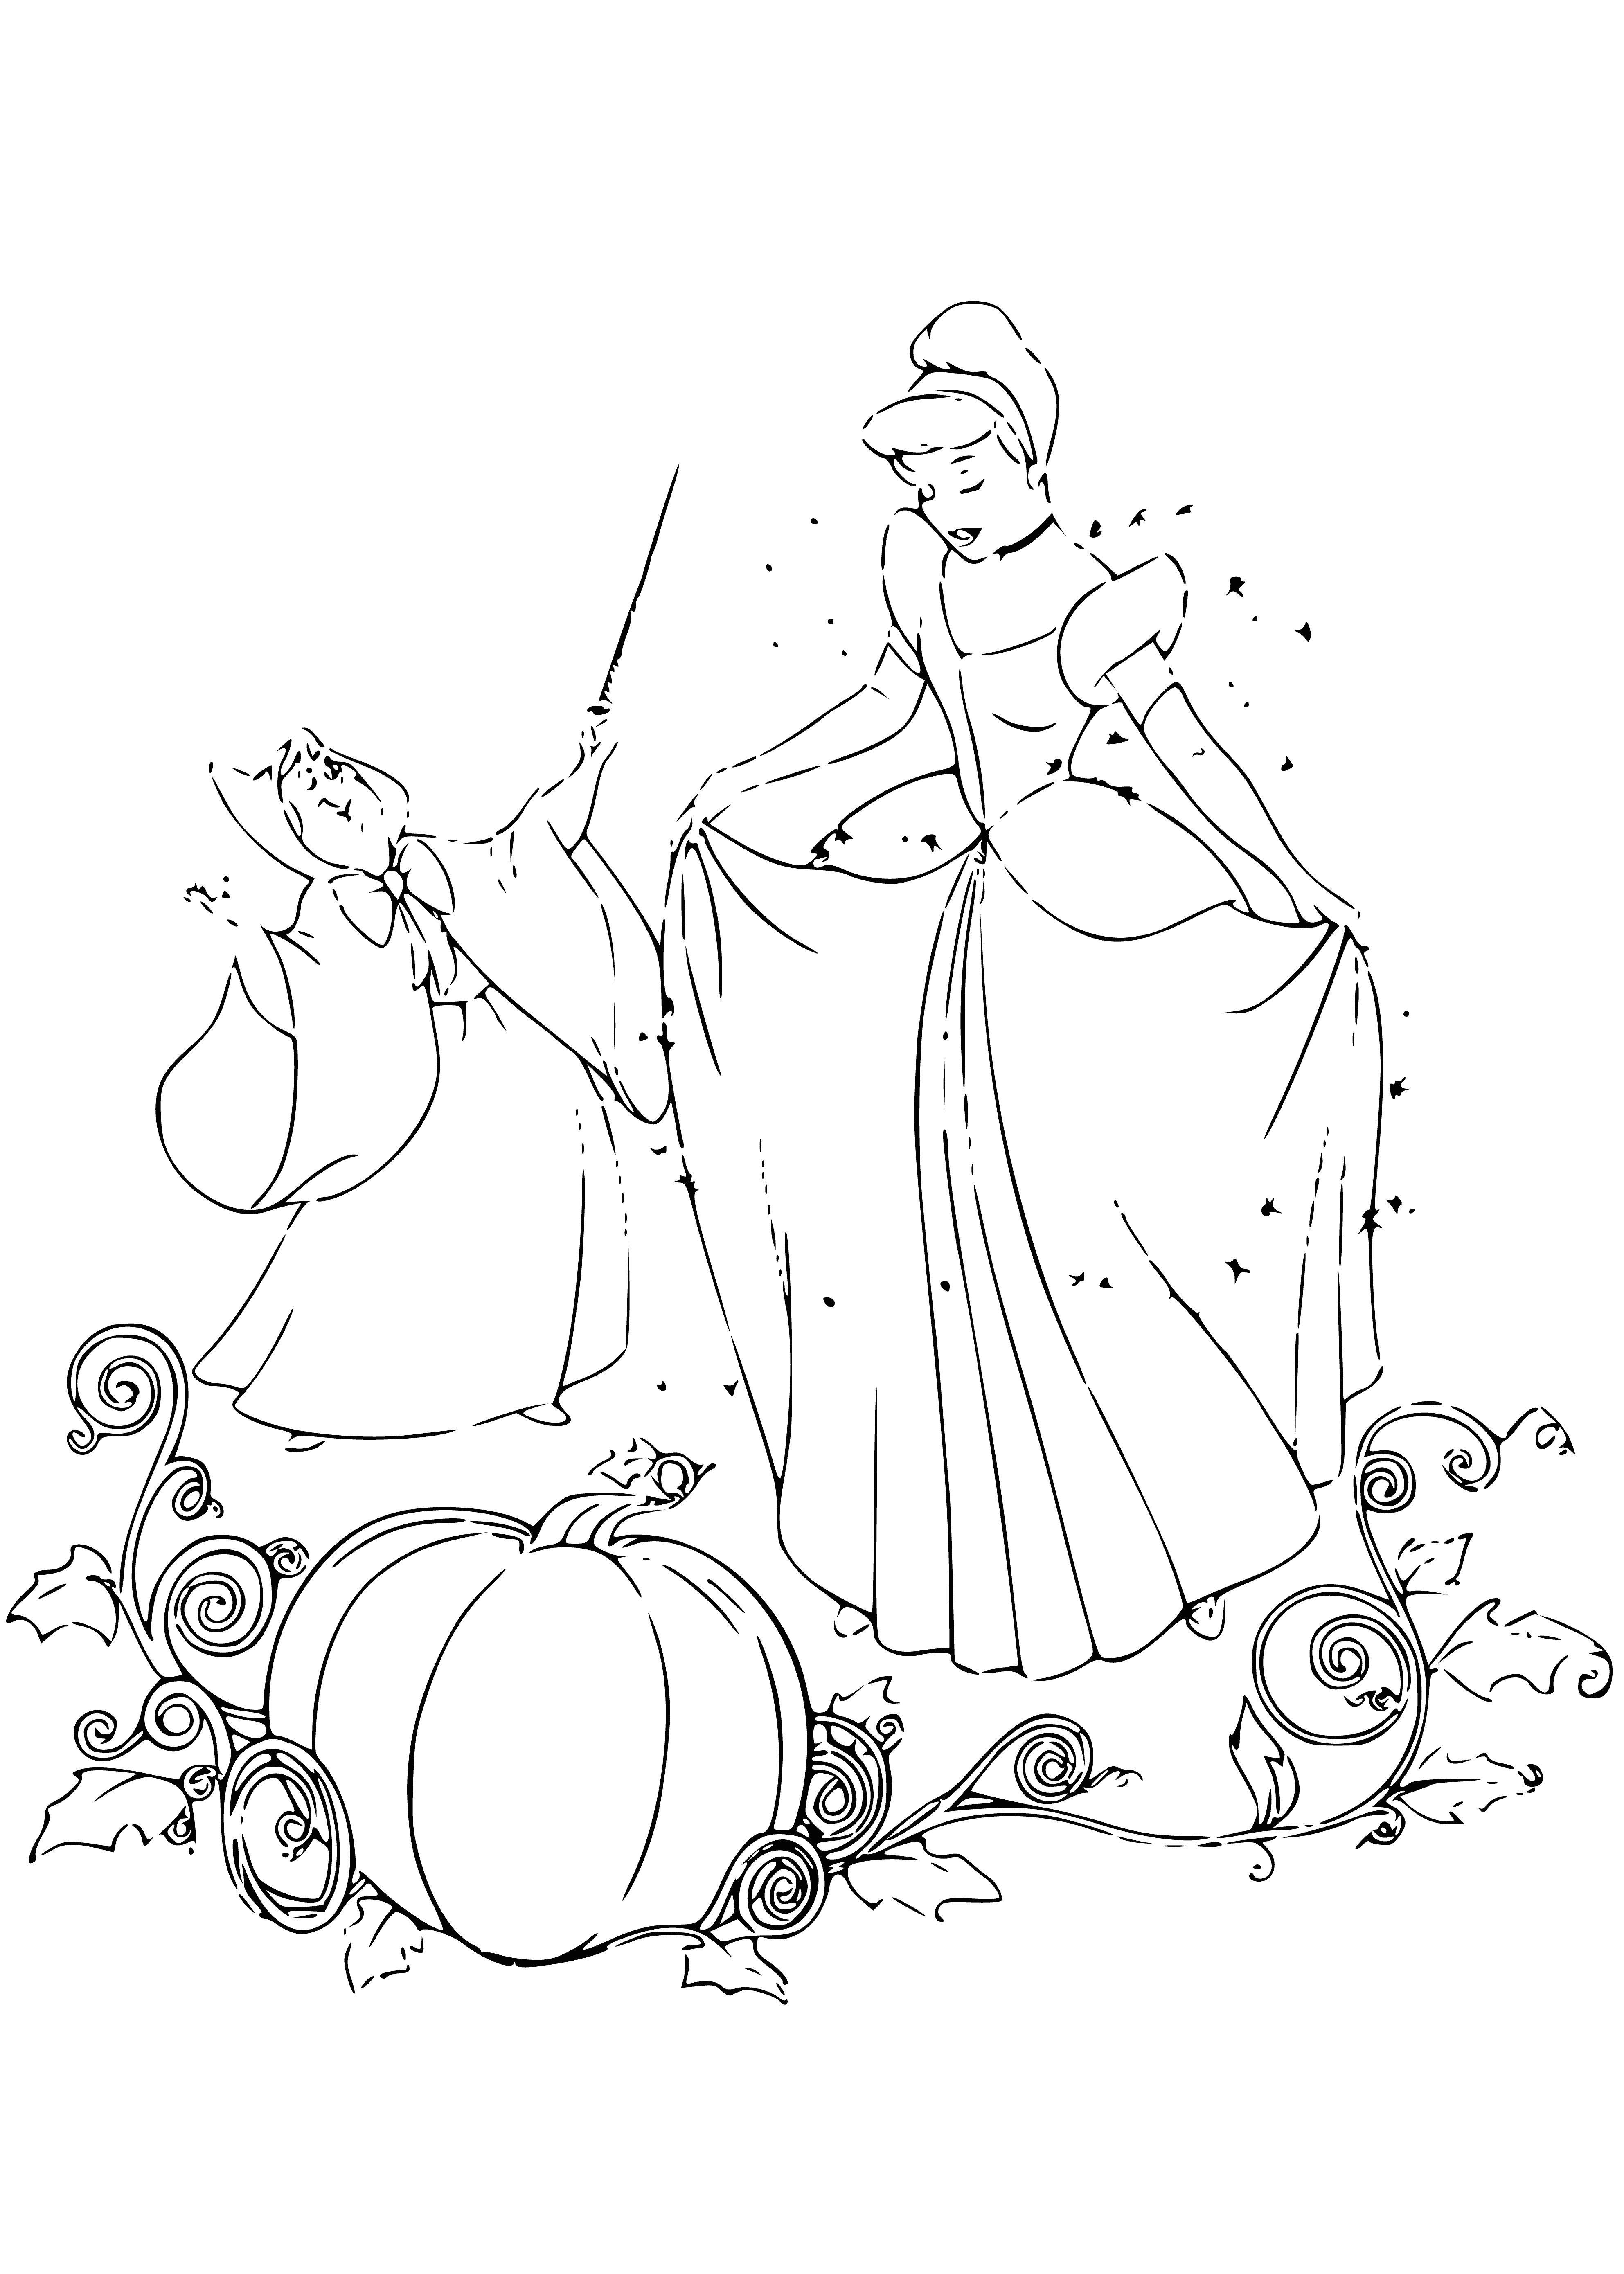 Fairy Godmother and Cinderella coloring page